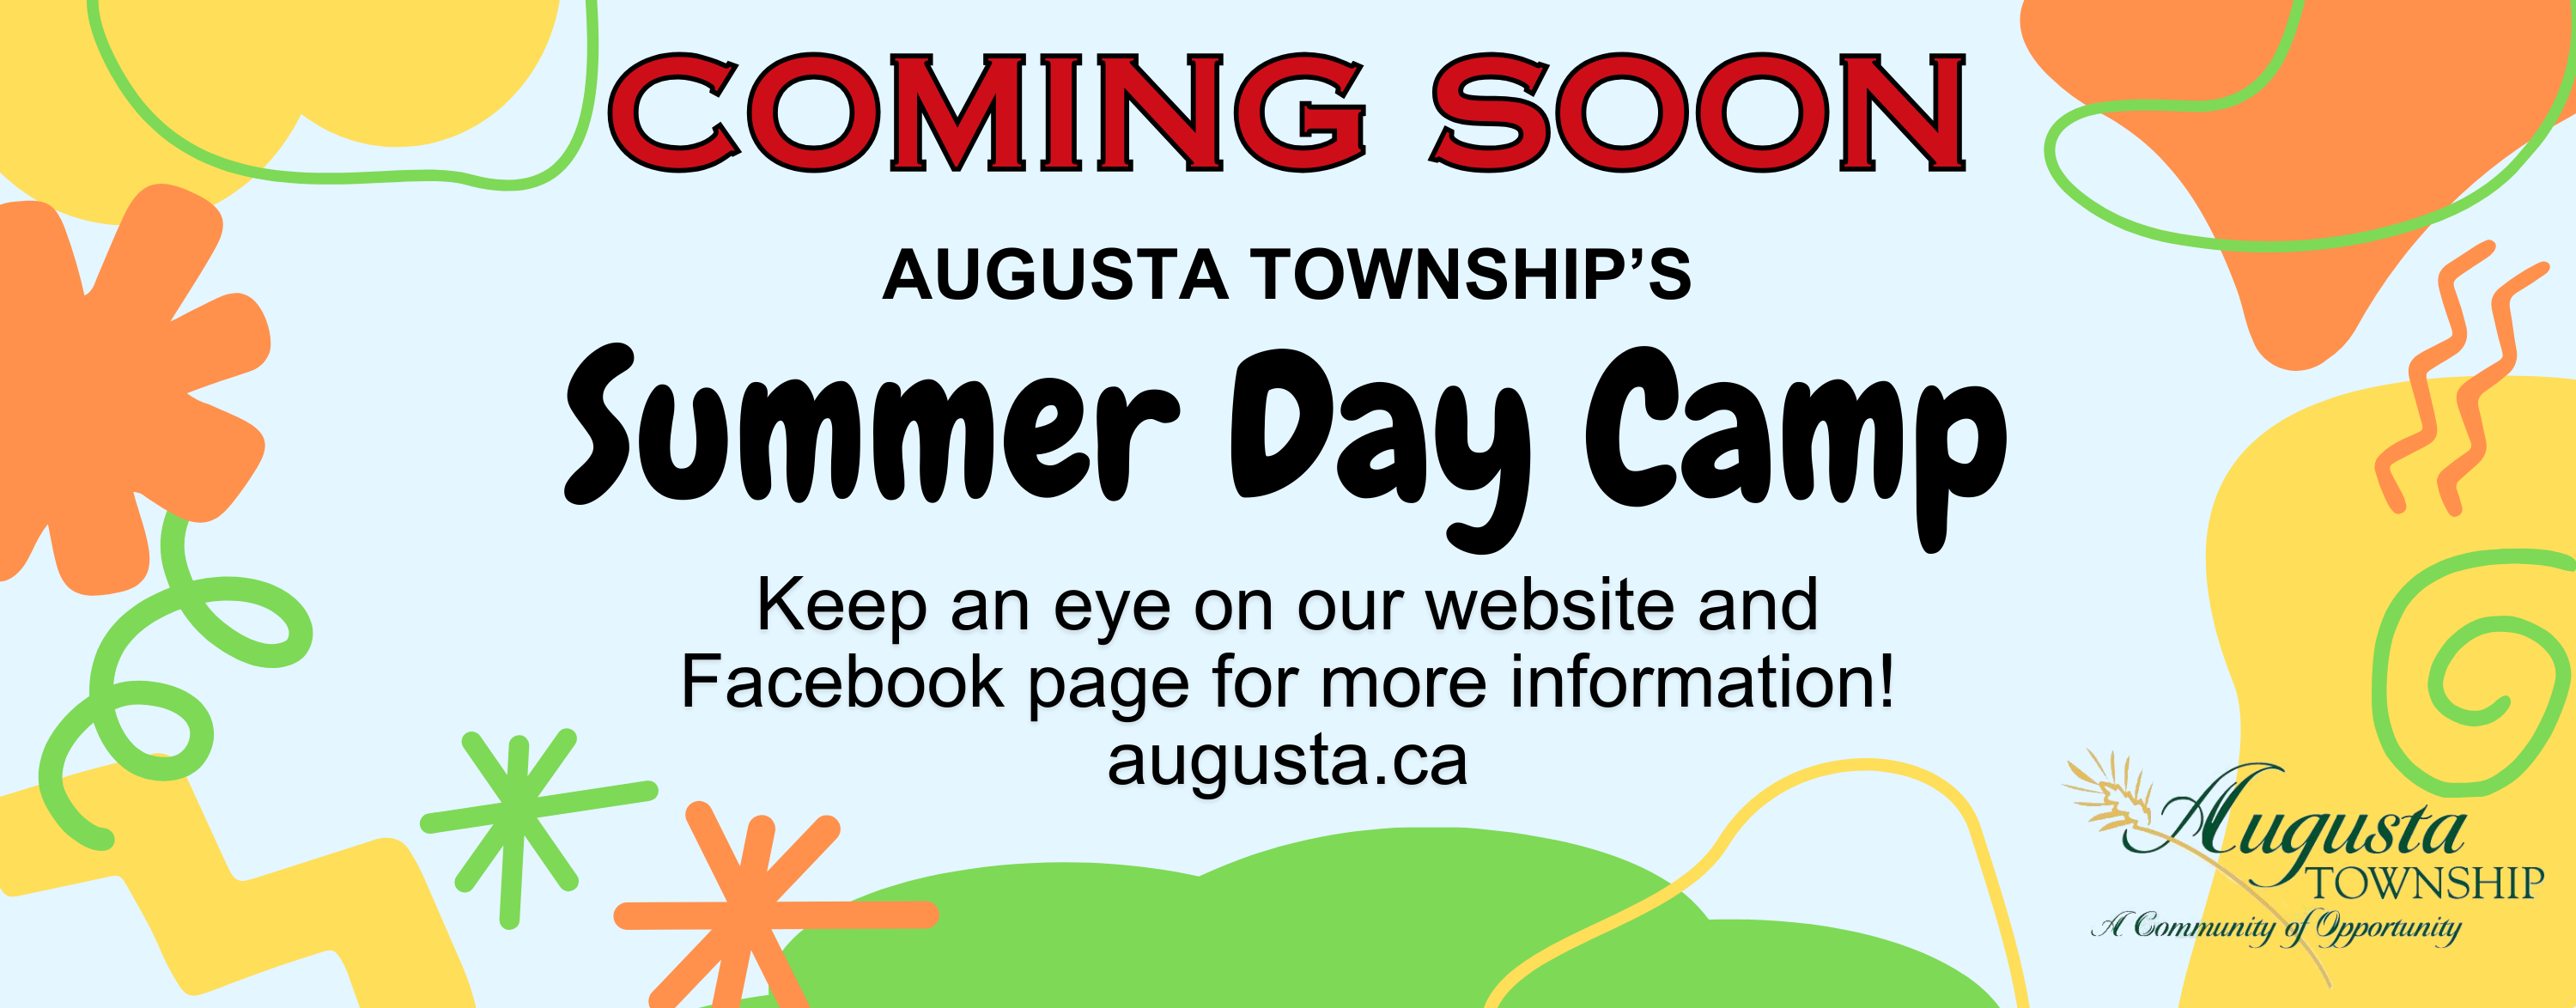 summer day camp coming soon